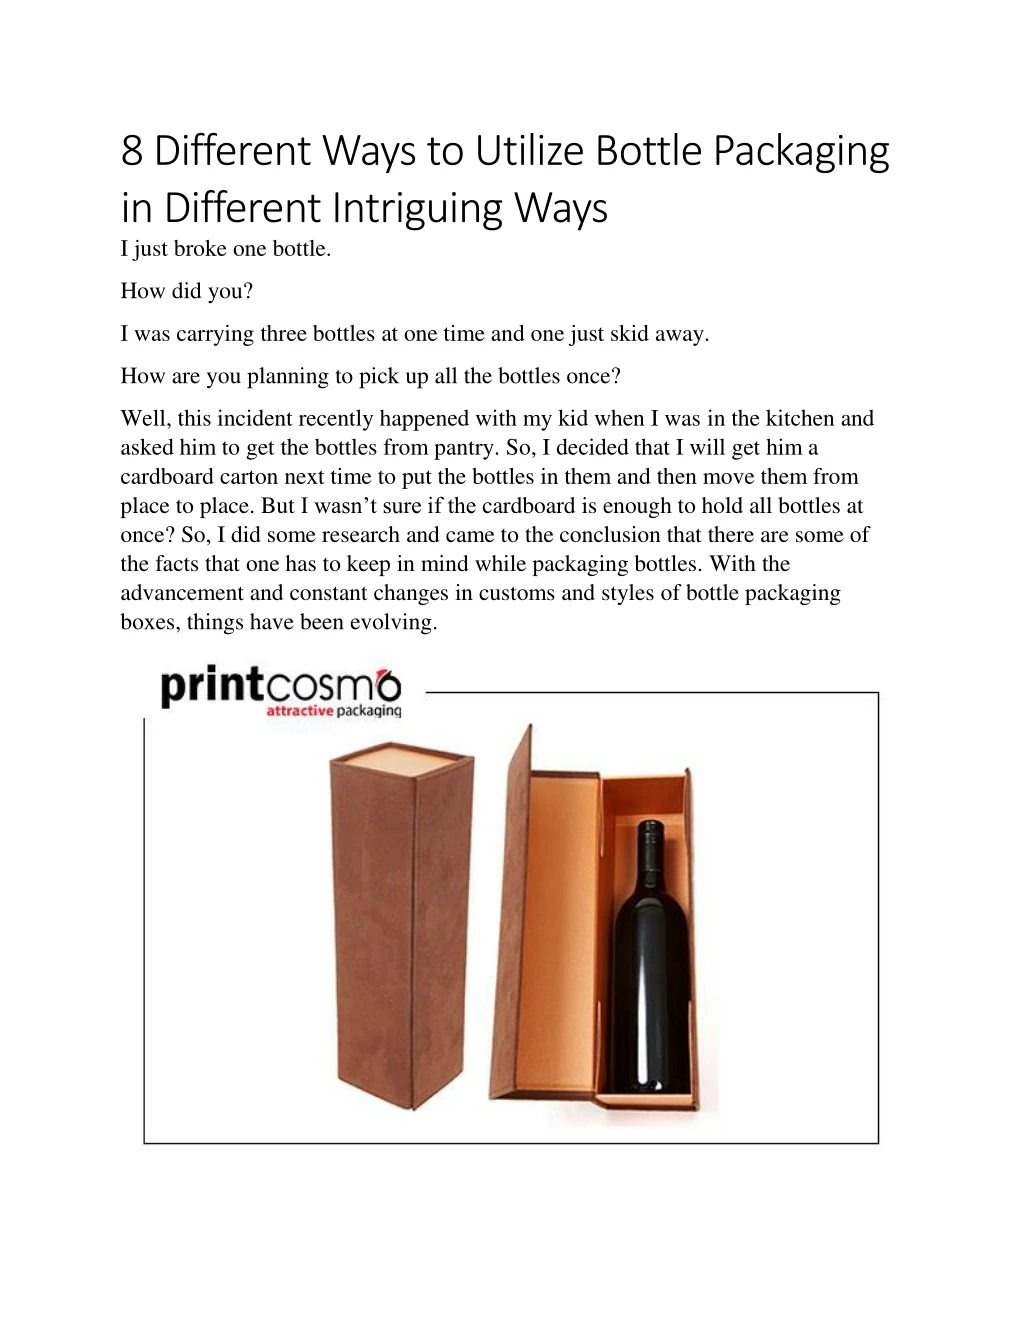 8 different ways to utilize bottle packaging